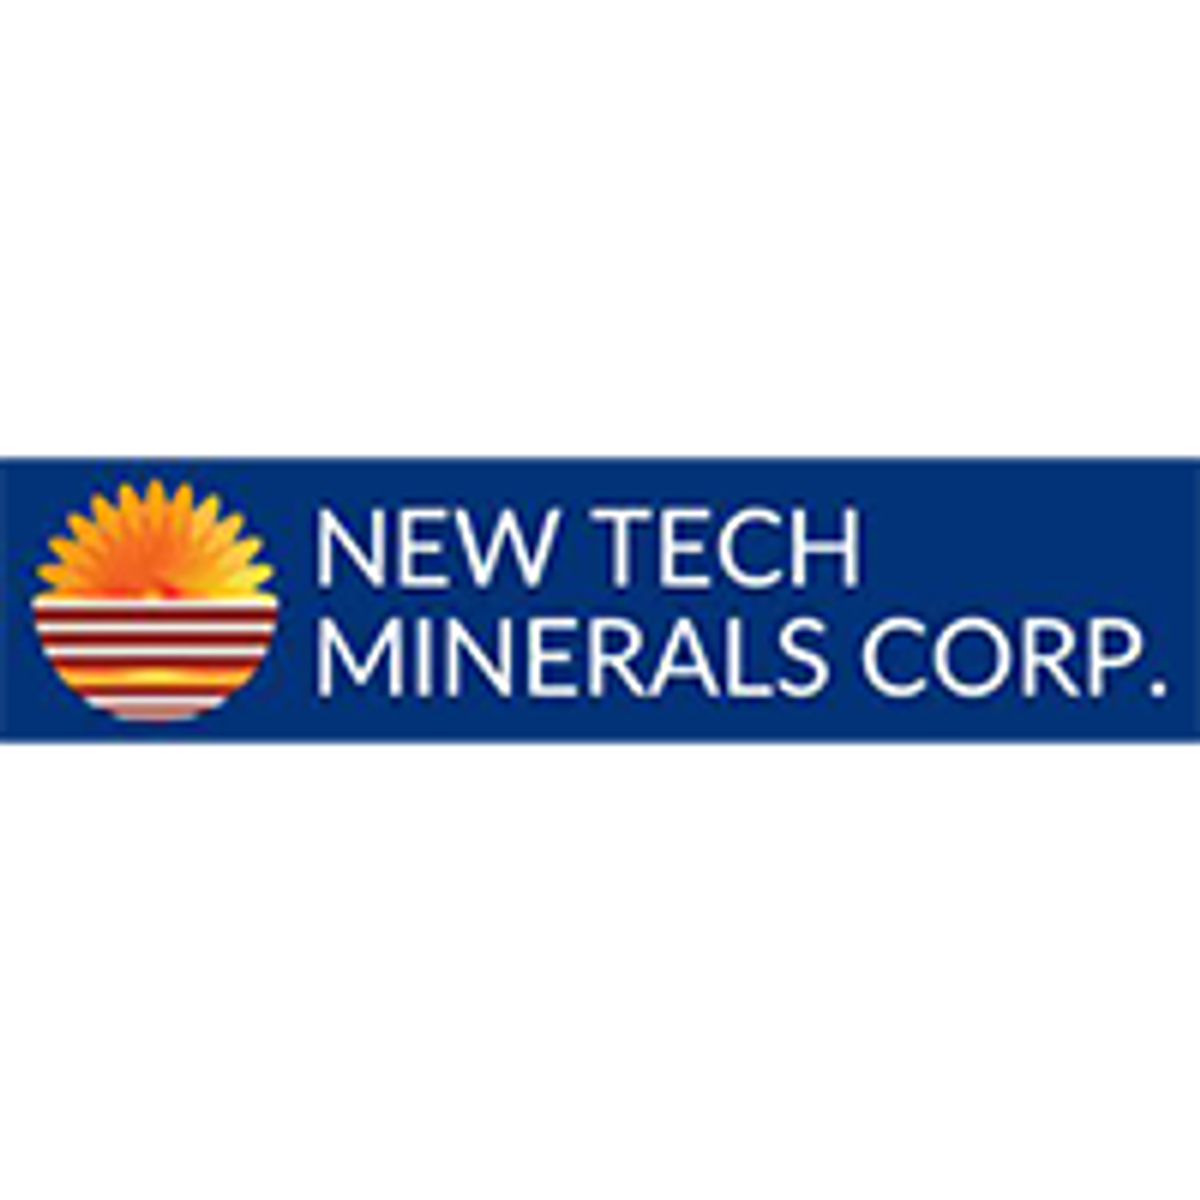 CSE Bulletin: Name and Symbol Change - New Tech Minerals Corp. 